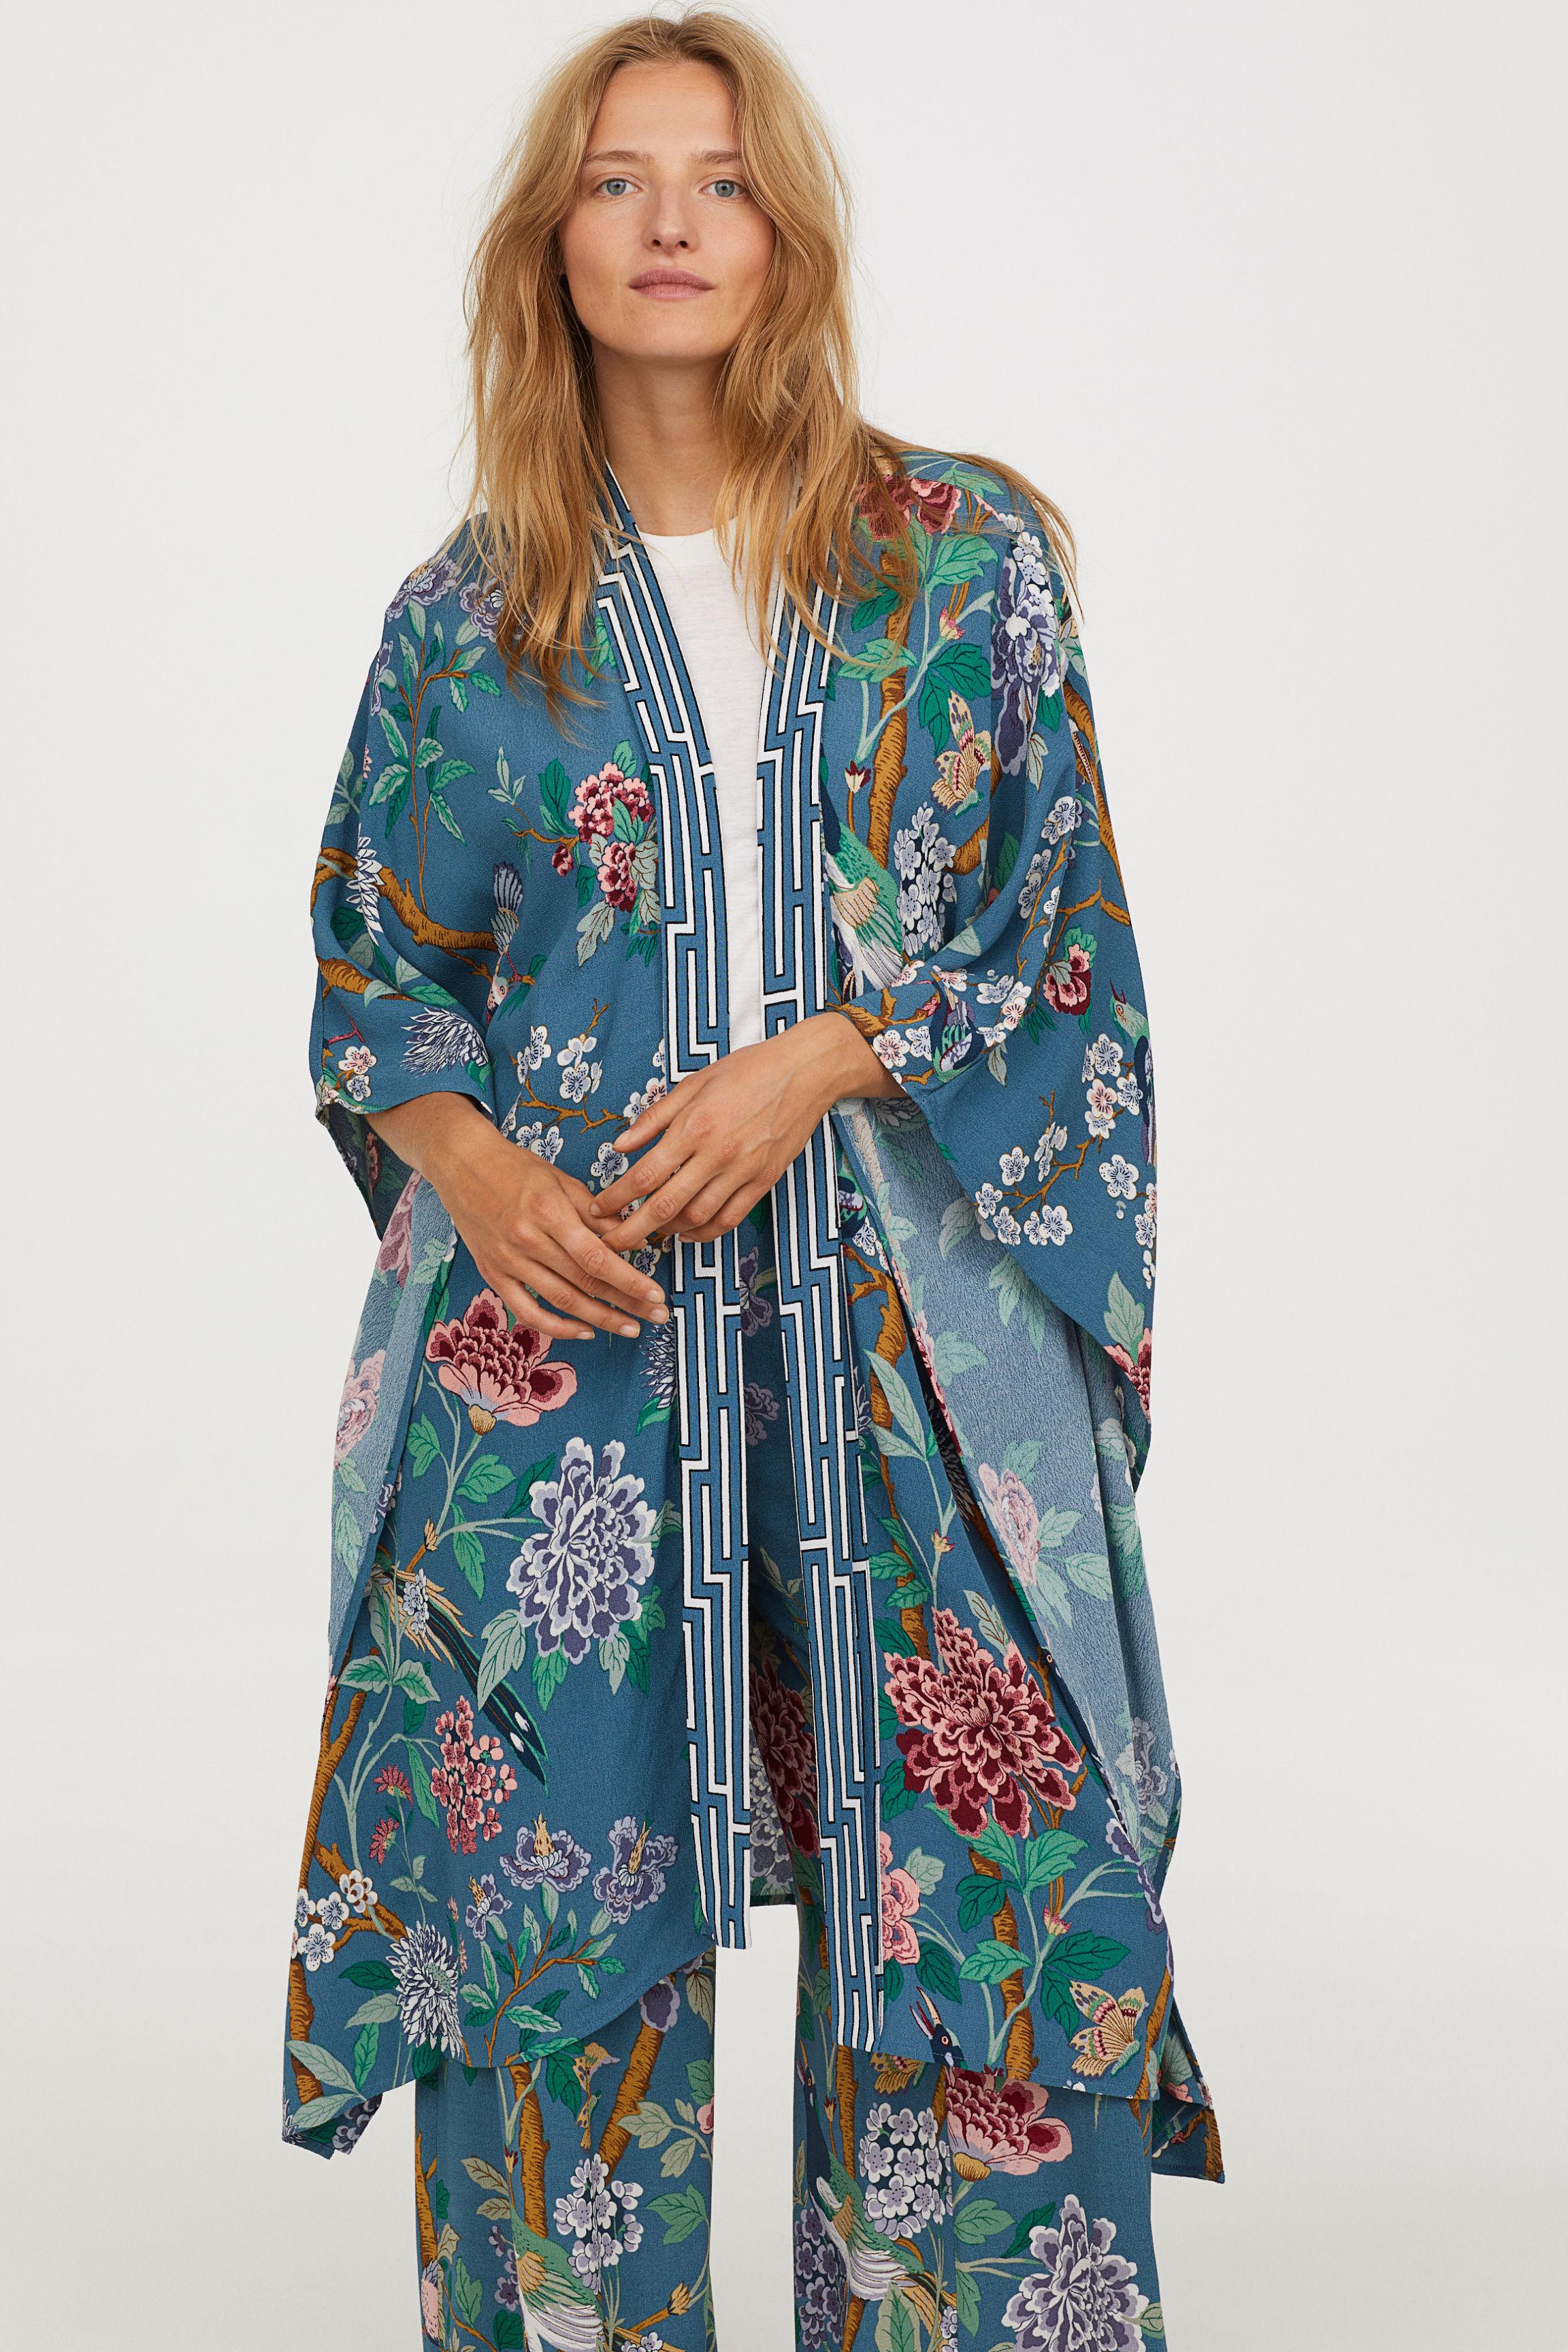 H&M Patterned Kimono in Blue | Lyst Canada